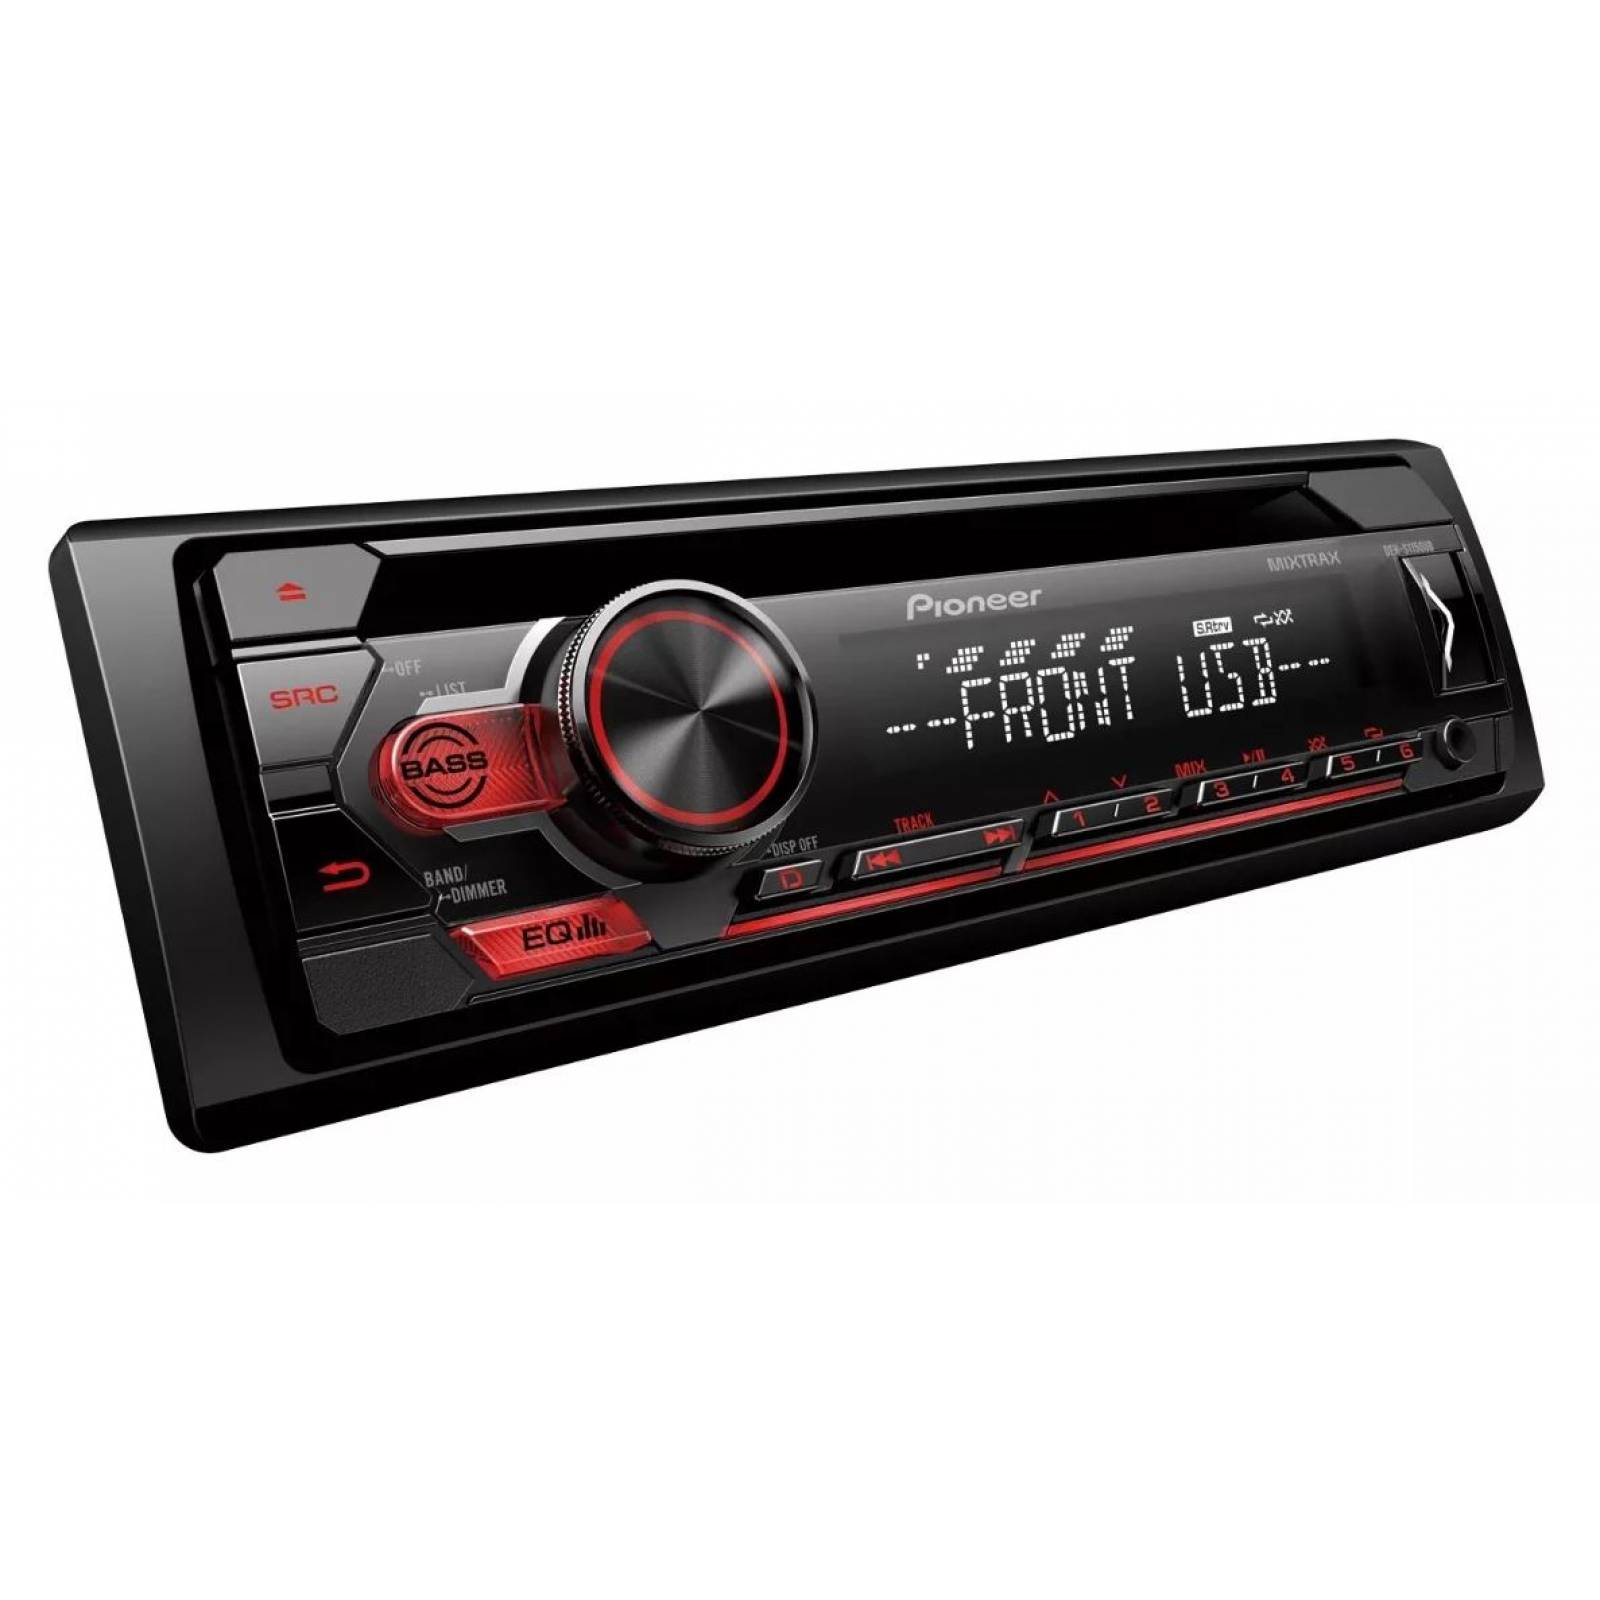 Autoestereo Pioneer Cd/mp3/usb Flac Android Deh-s1150ub